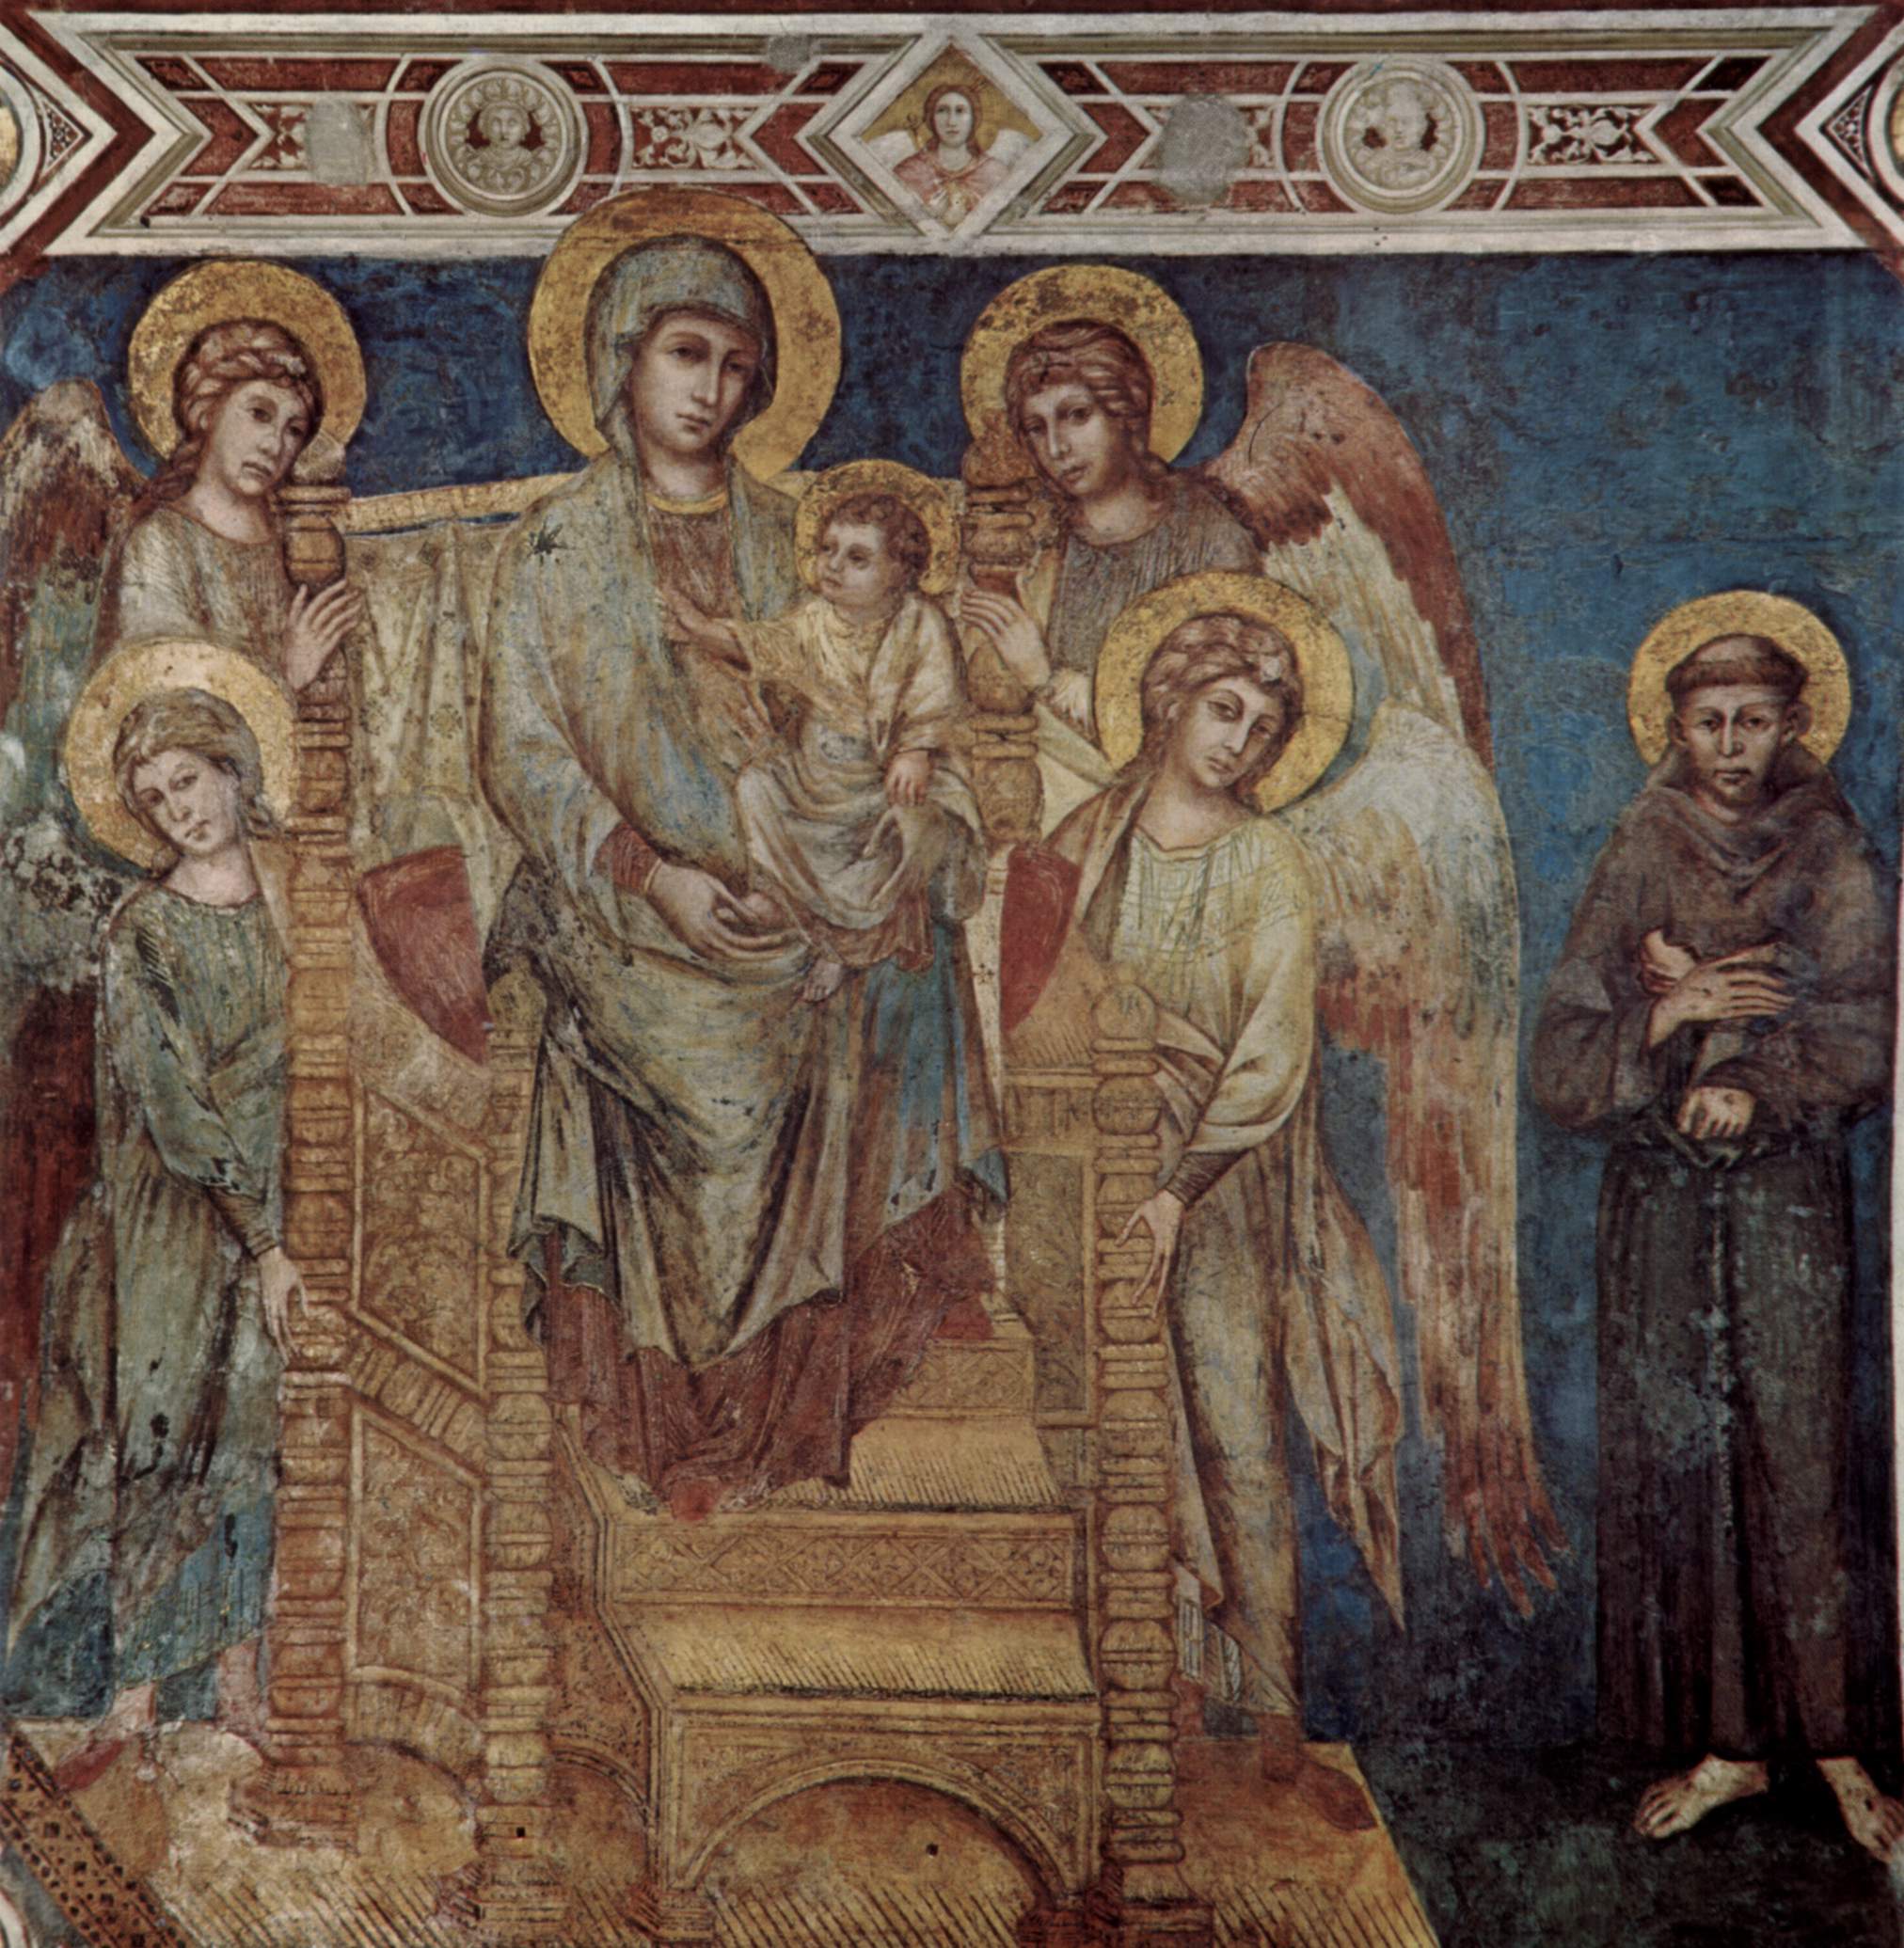 Cimabue, Majesty of Assisi (ca. 1285-1288; fresco, 320 x 340 cm; Assisi, Lower Basilica of St. Francis)